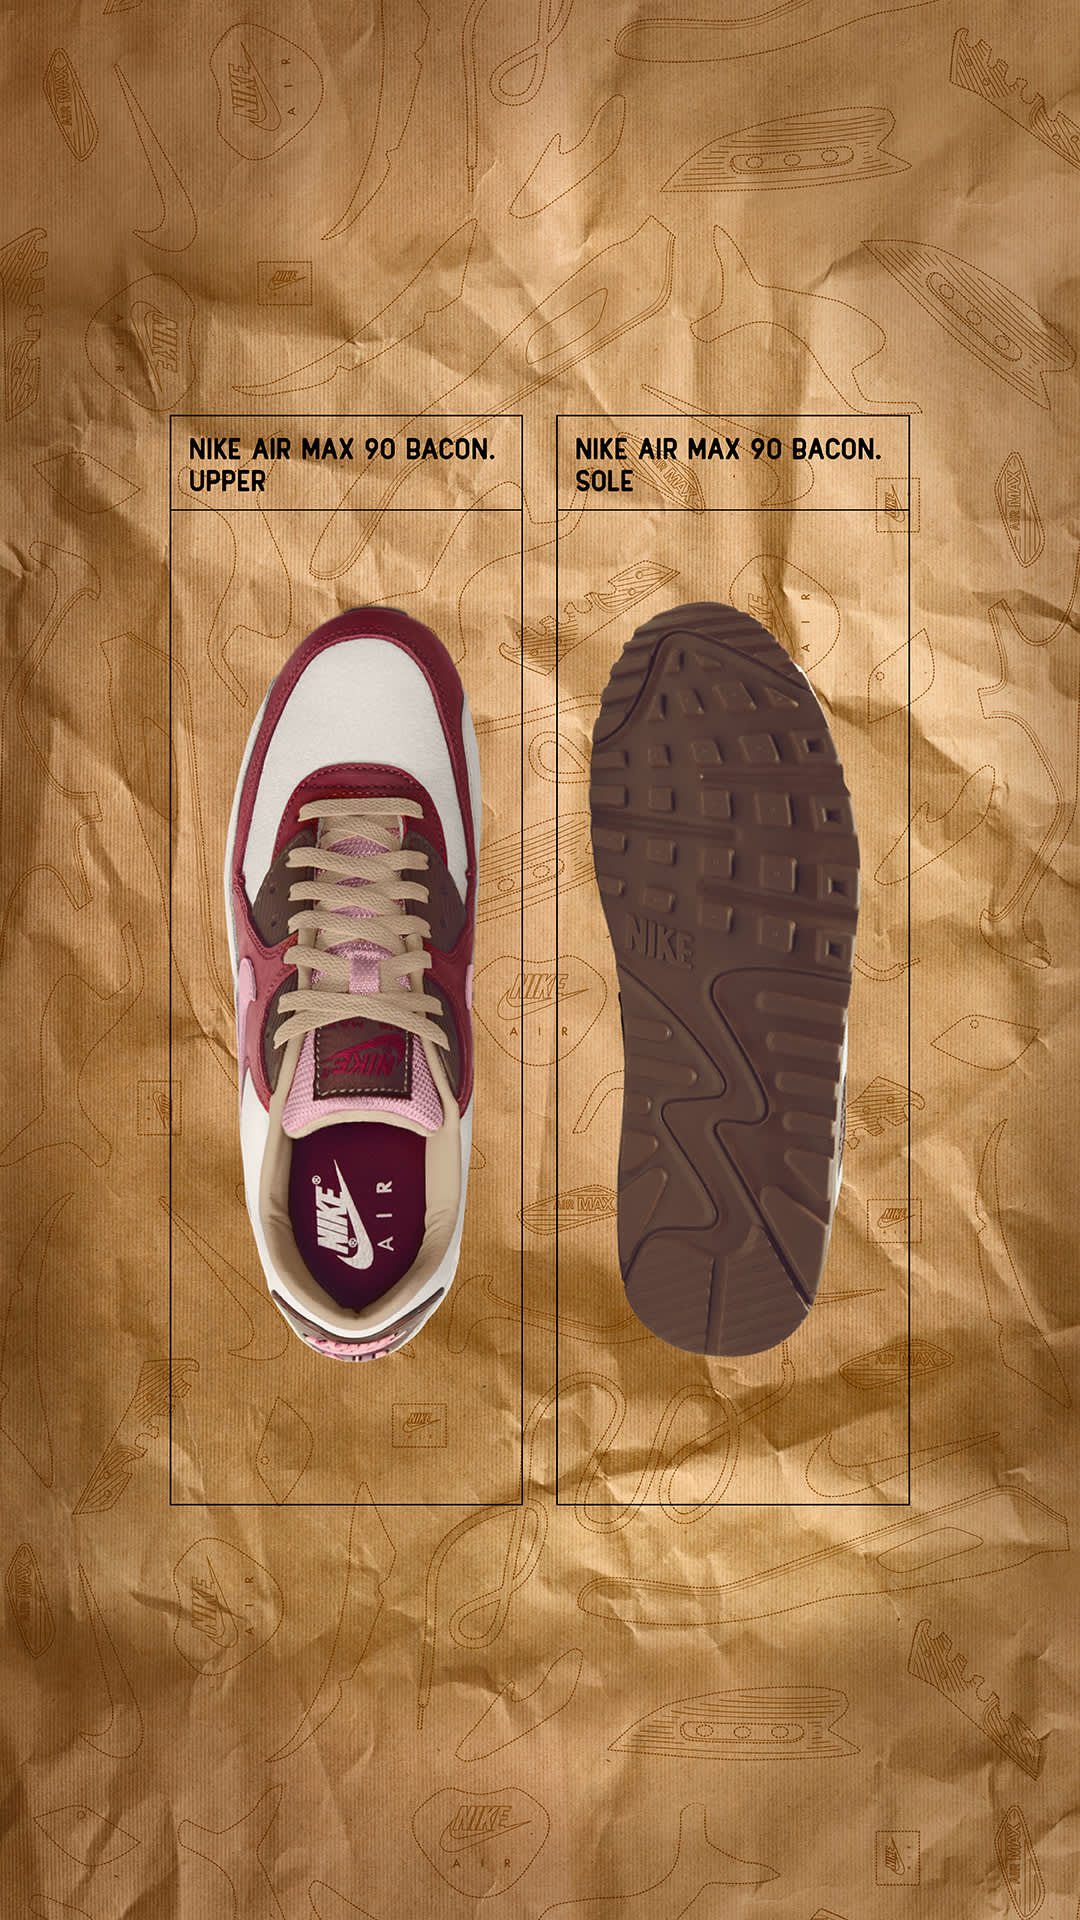 SNKRS Special: Air Max 90 'Bacon'. Nike SNKRS